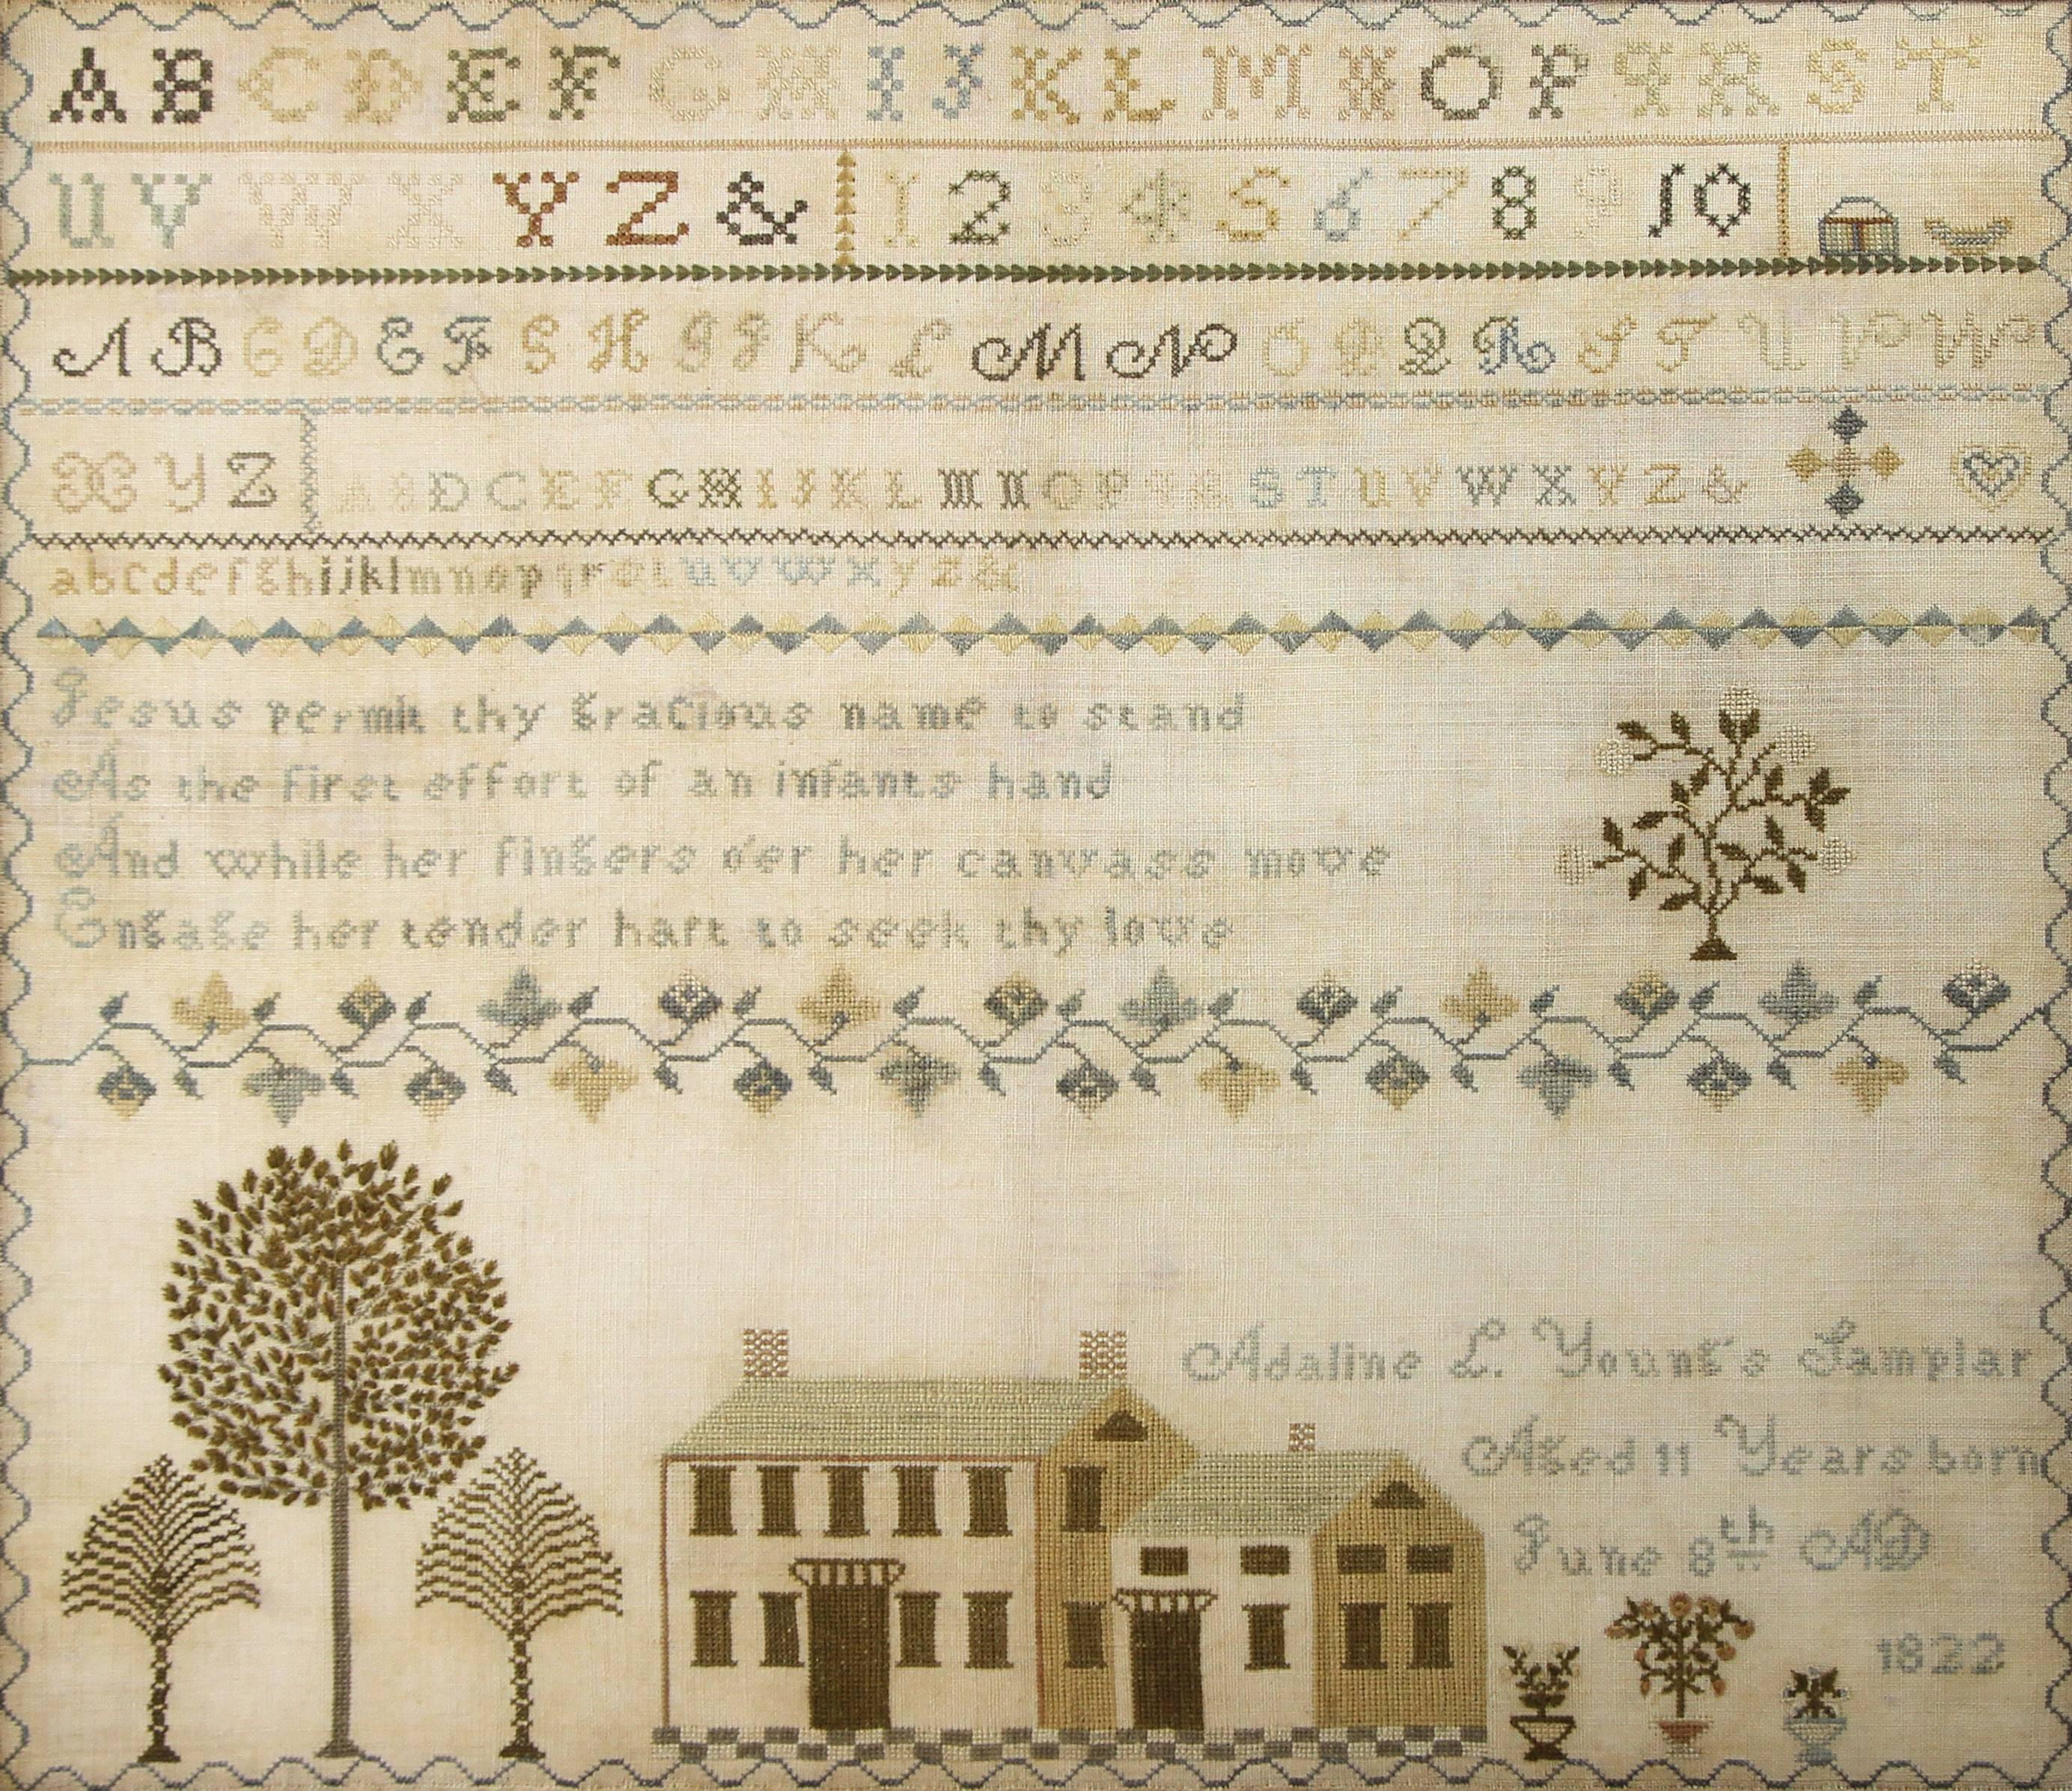 New London County, connecticut produced many excellent samplers from the middle of the 18th century through the first decades of the 19th century. Characterized by strong pictorial scenes executed in Fine needlework, these samplers are evidence of